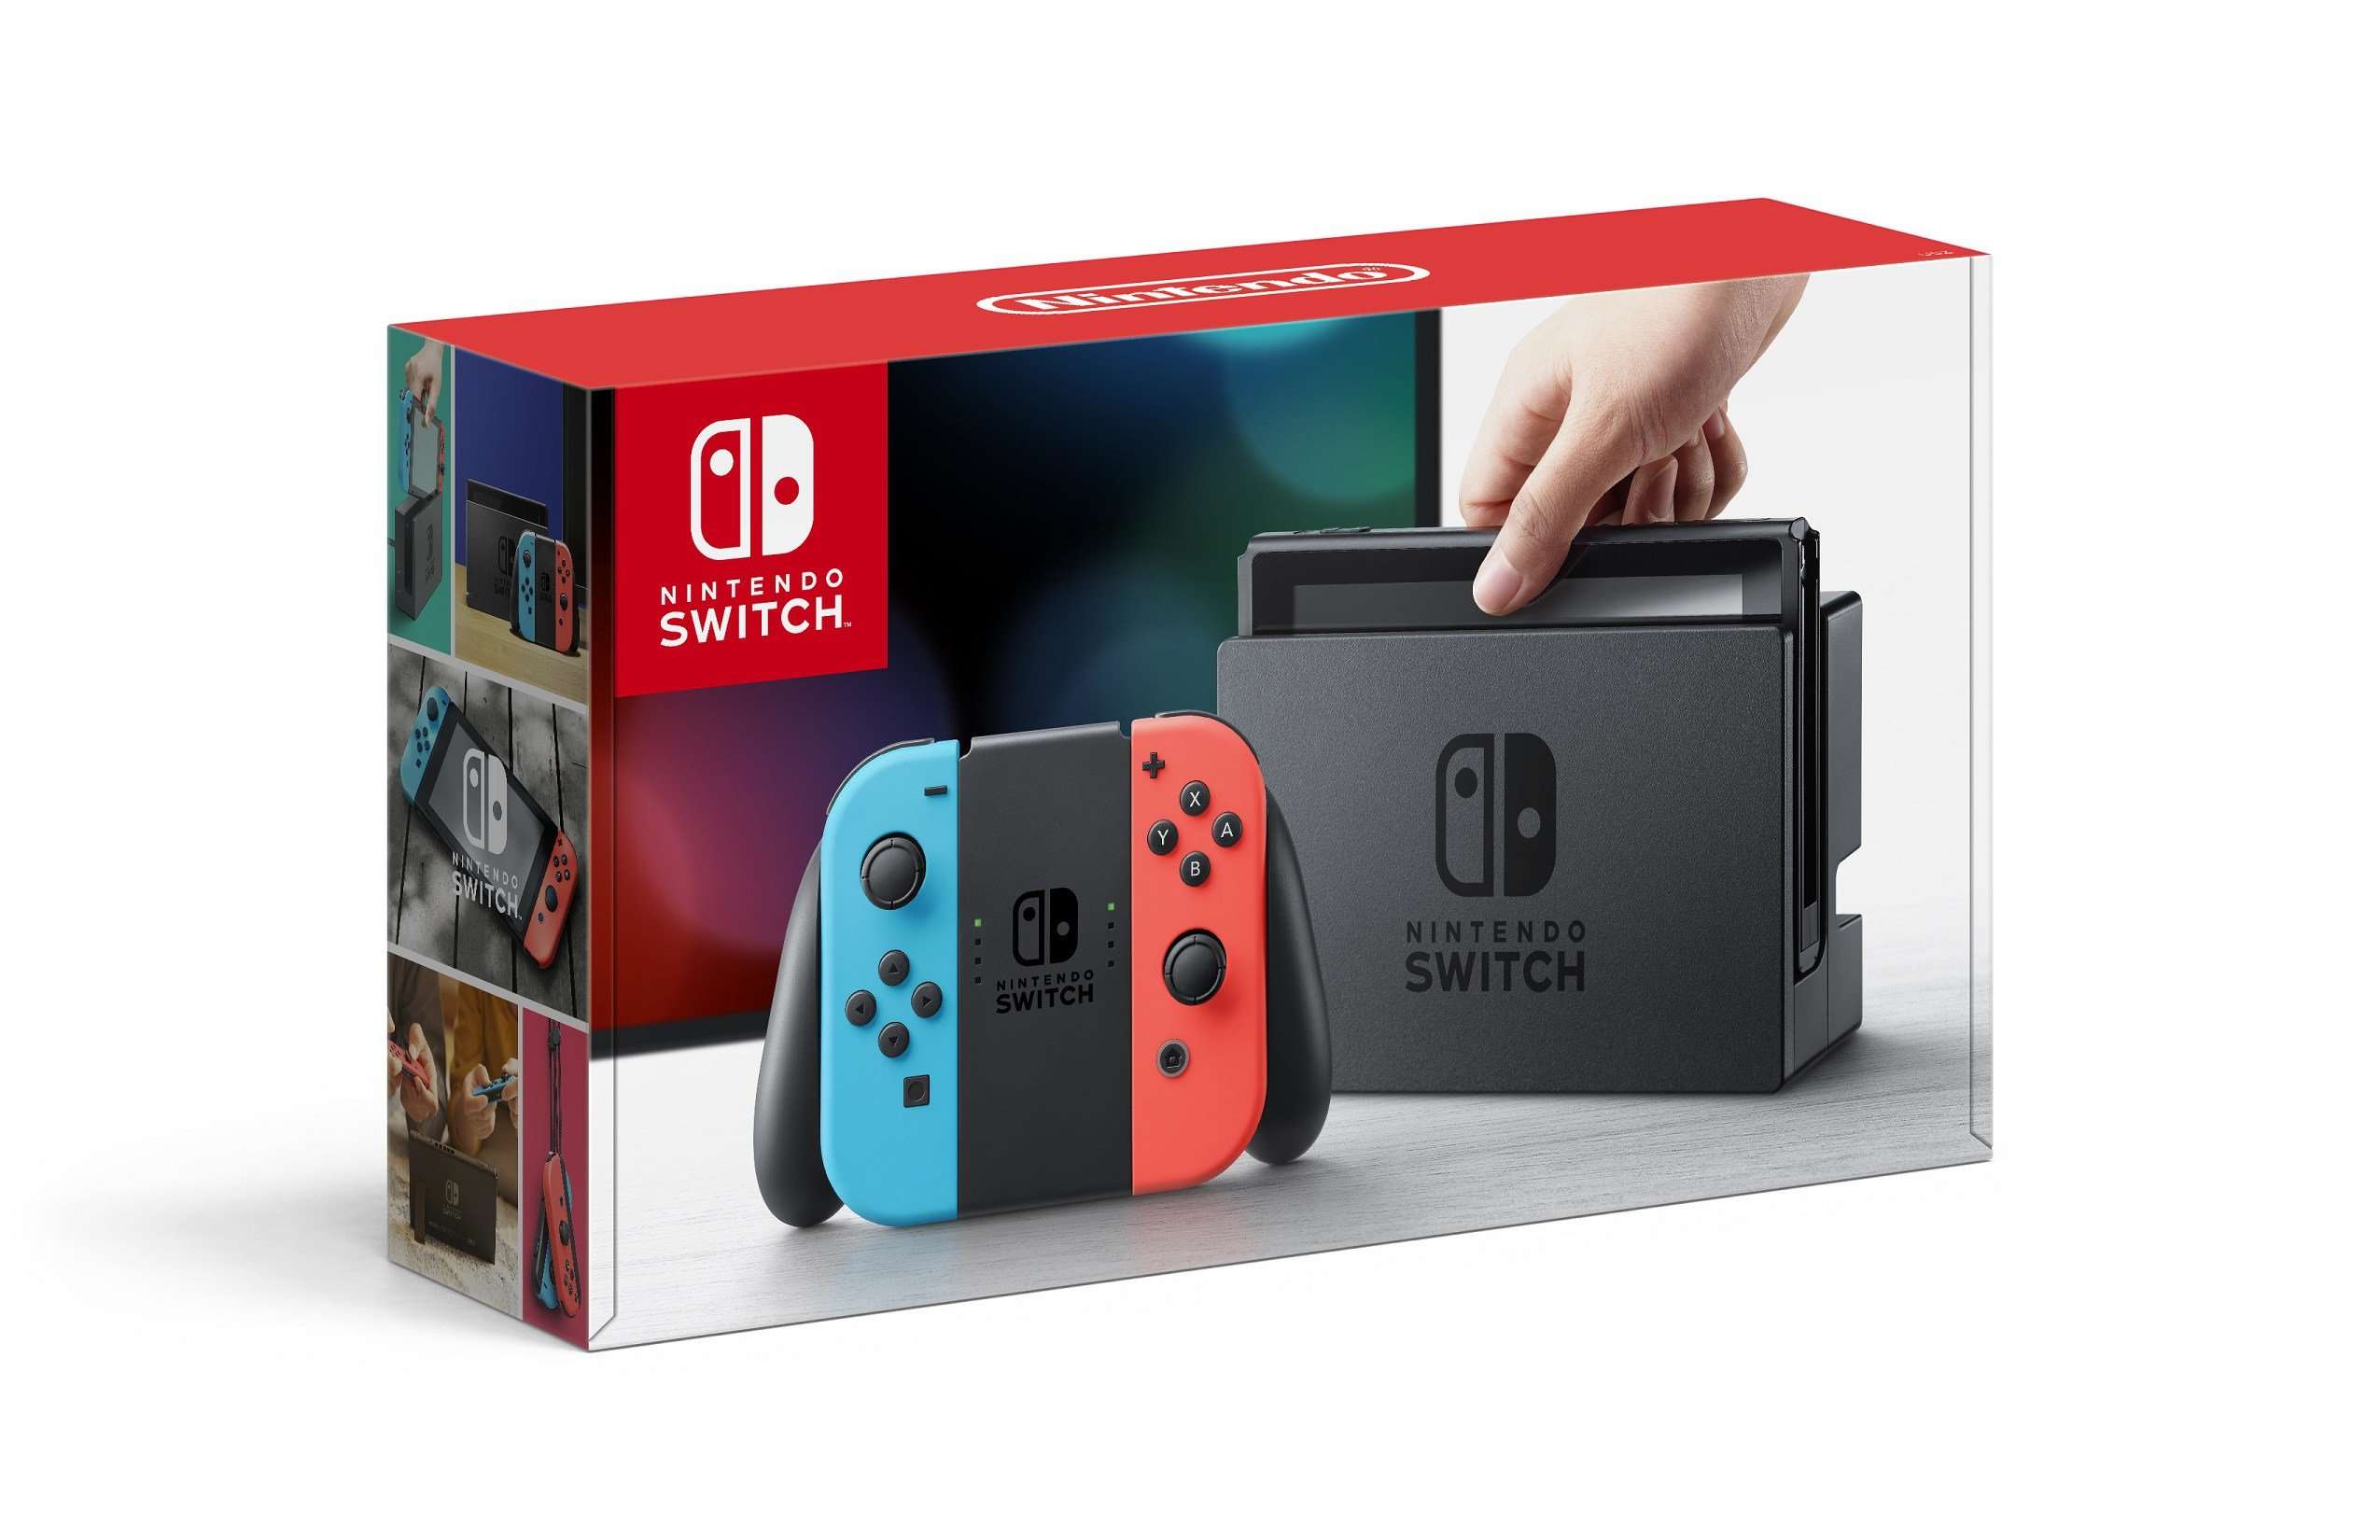 image for Nintendo Switch Sells 4.7 Million Units in First Four Months